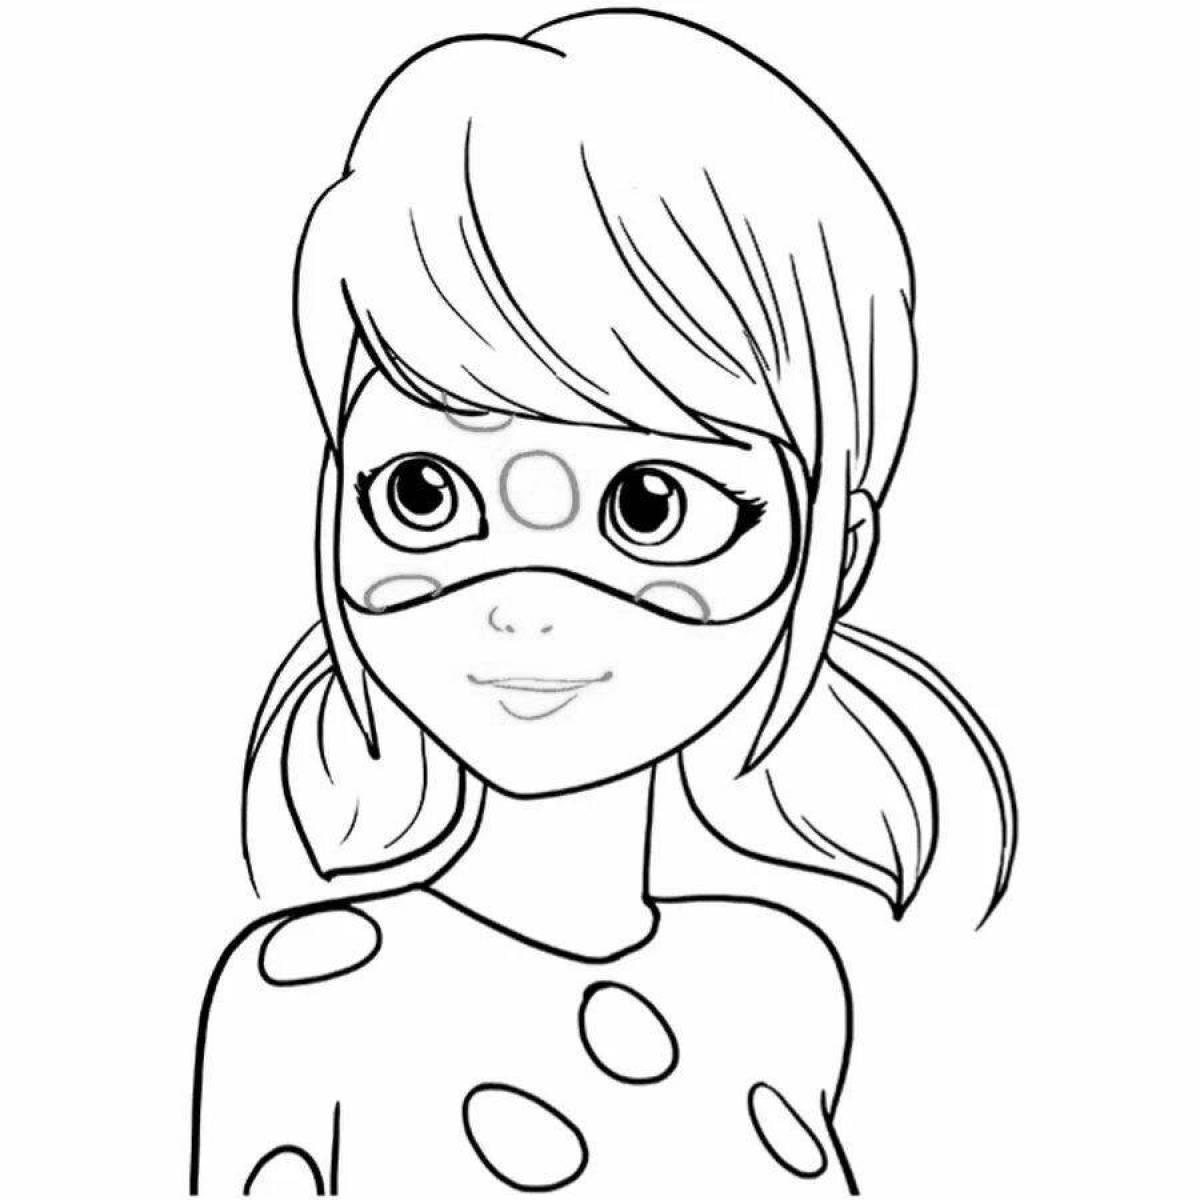 Lovely ladybug coloring page